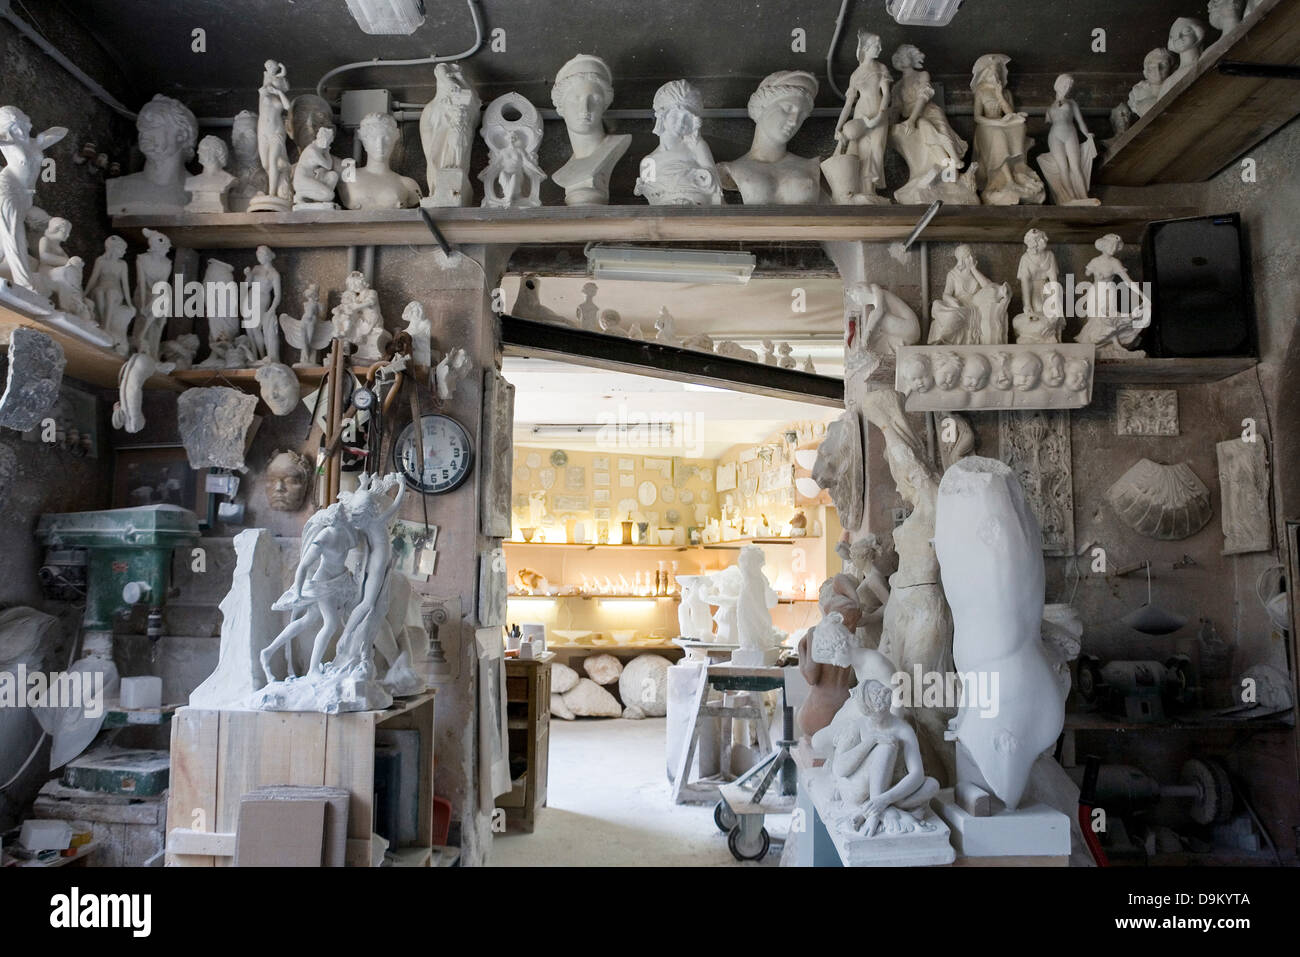 Large group of art and sculpture in artist's studio Stock Photo